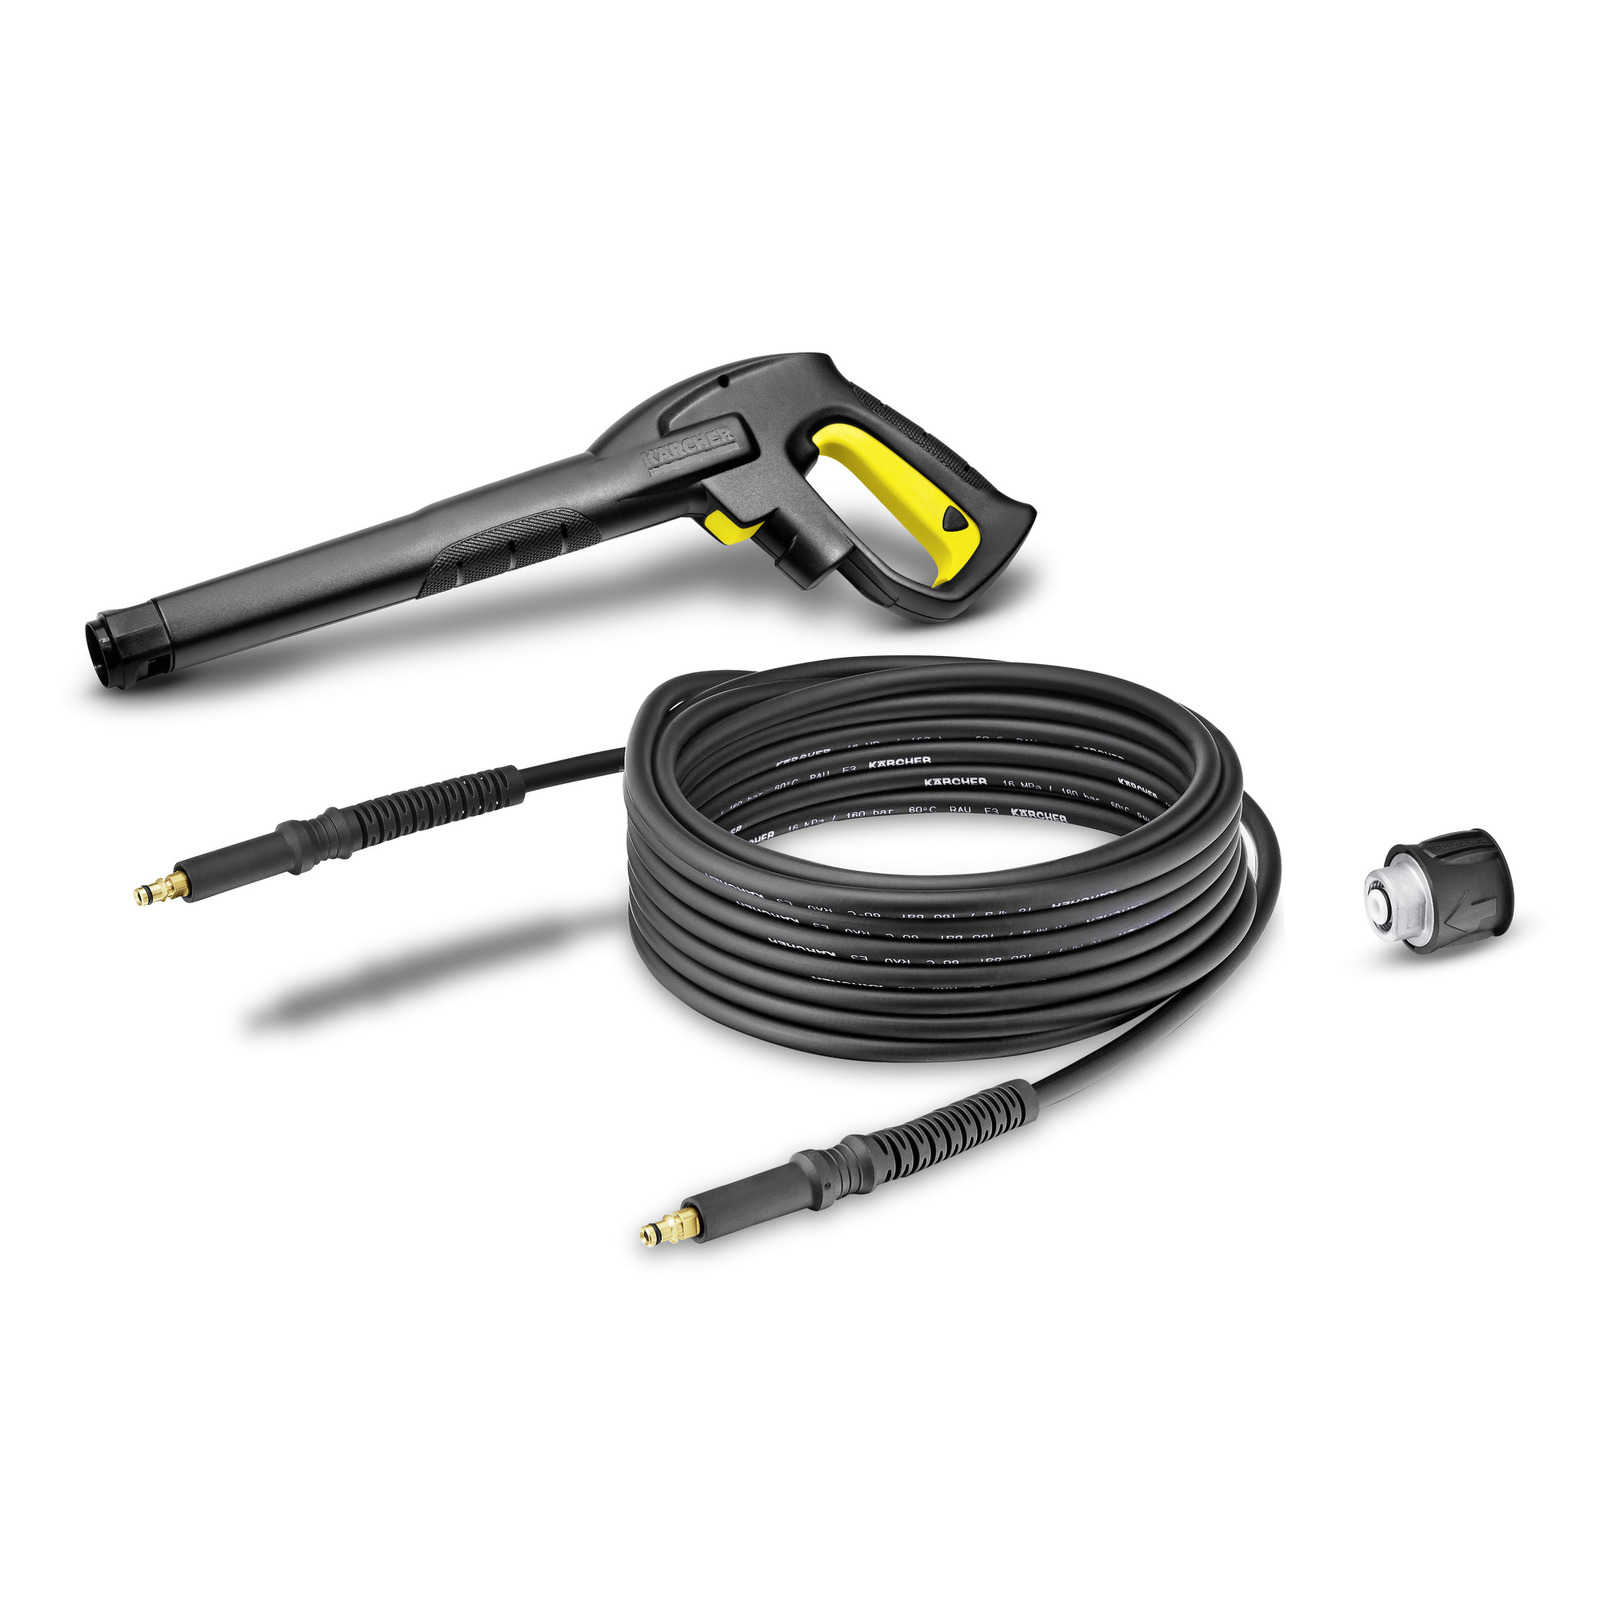 5 METRE POWER WASHER HIGH PRESSURE REPLACEMENT HOSE FOR KARCHER K2 CLEARNER 